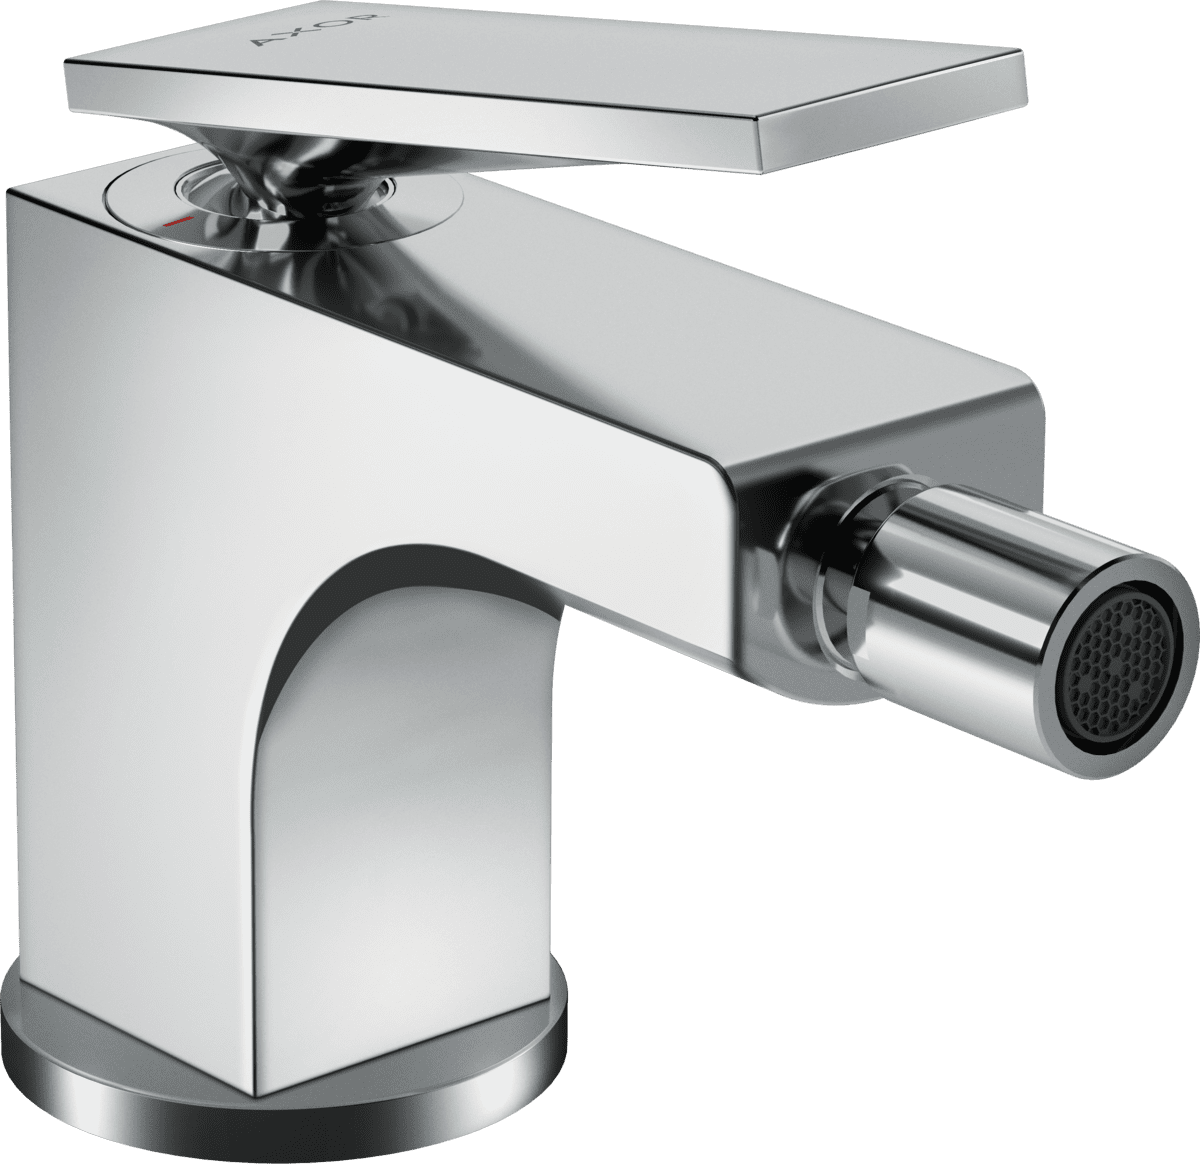 Picture of HANSGROHE AXOR Citterio Single lever bidet mixer with lever handle and pop-up waste set #39214000 - Chrome